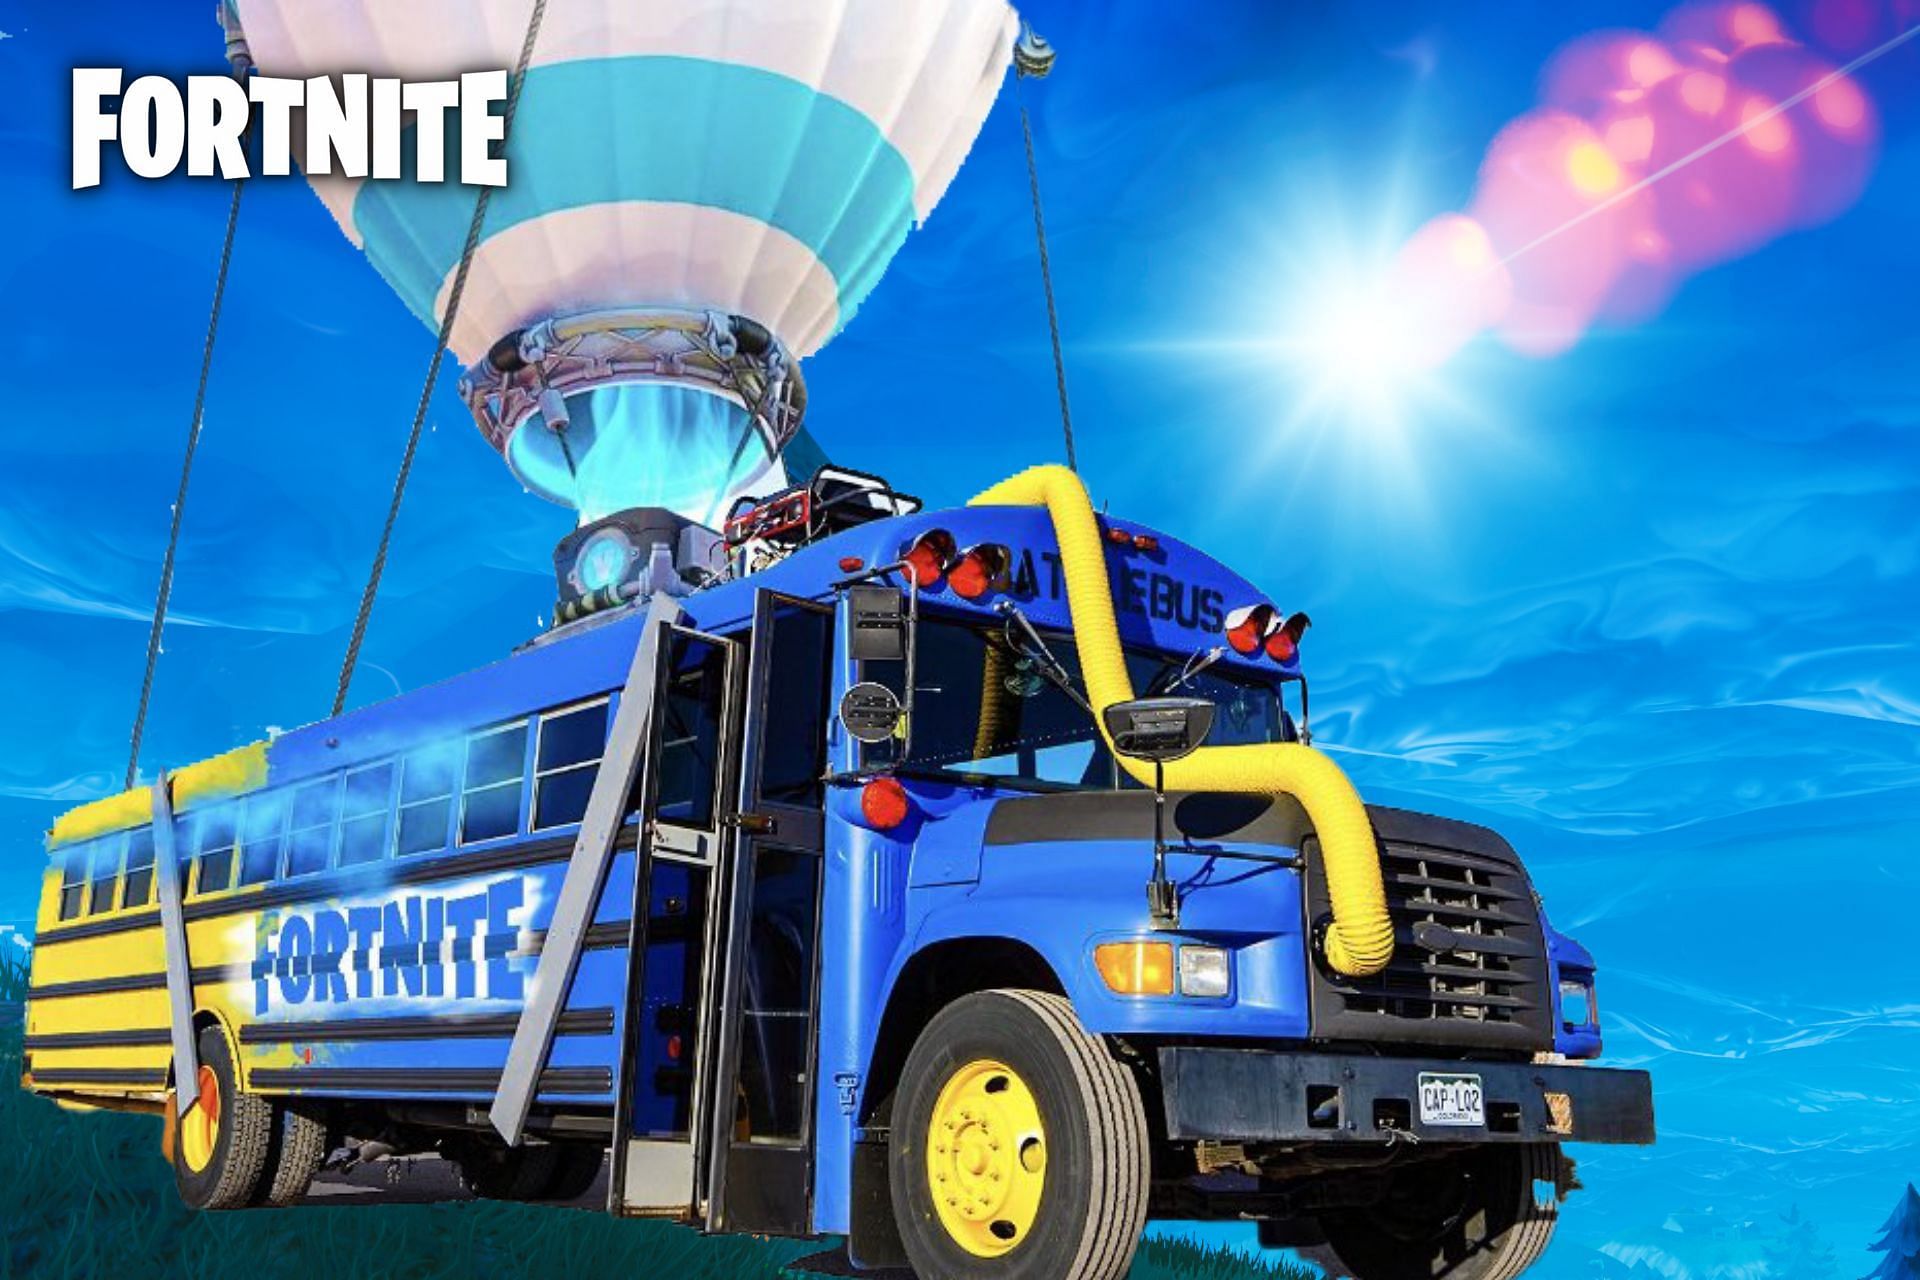 A YouTuber has recreated the famous Fortnite Battle Bus in real life (Image via Sportskeeda)